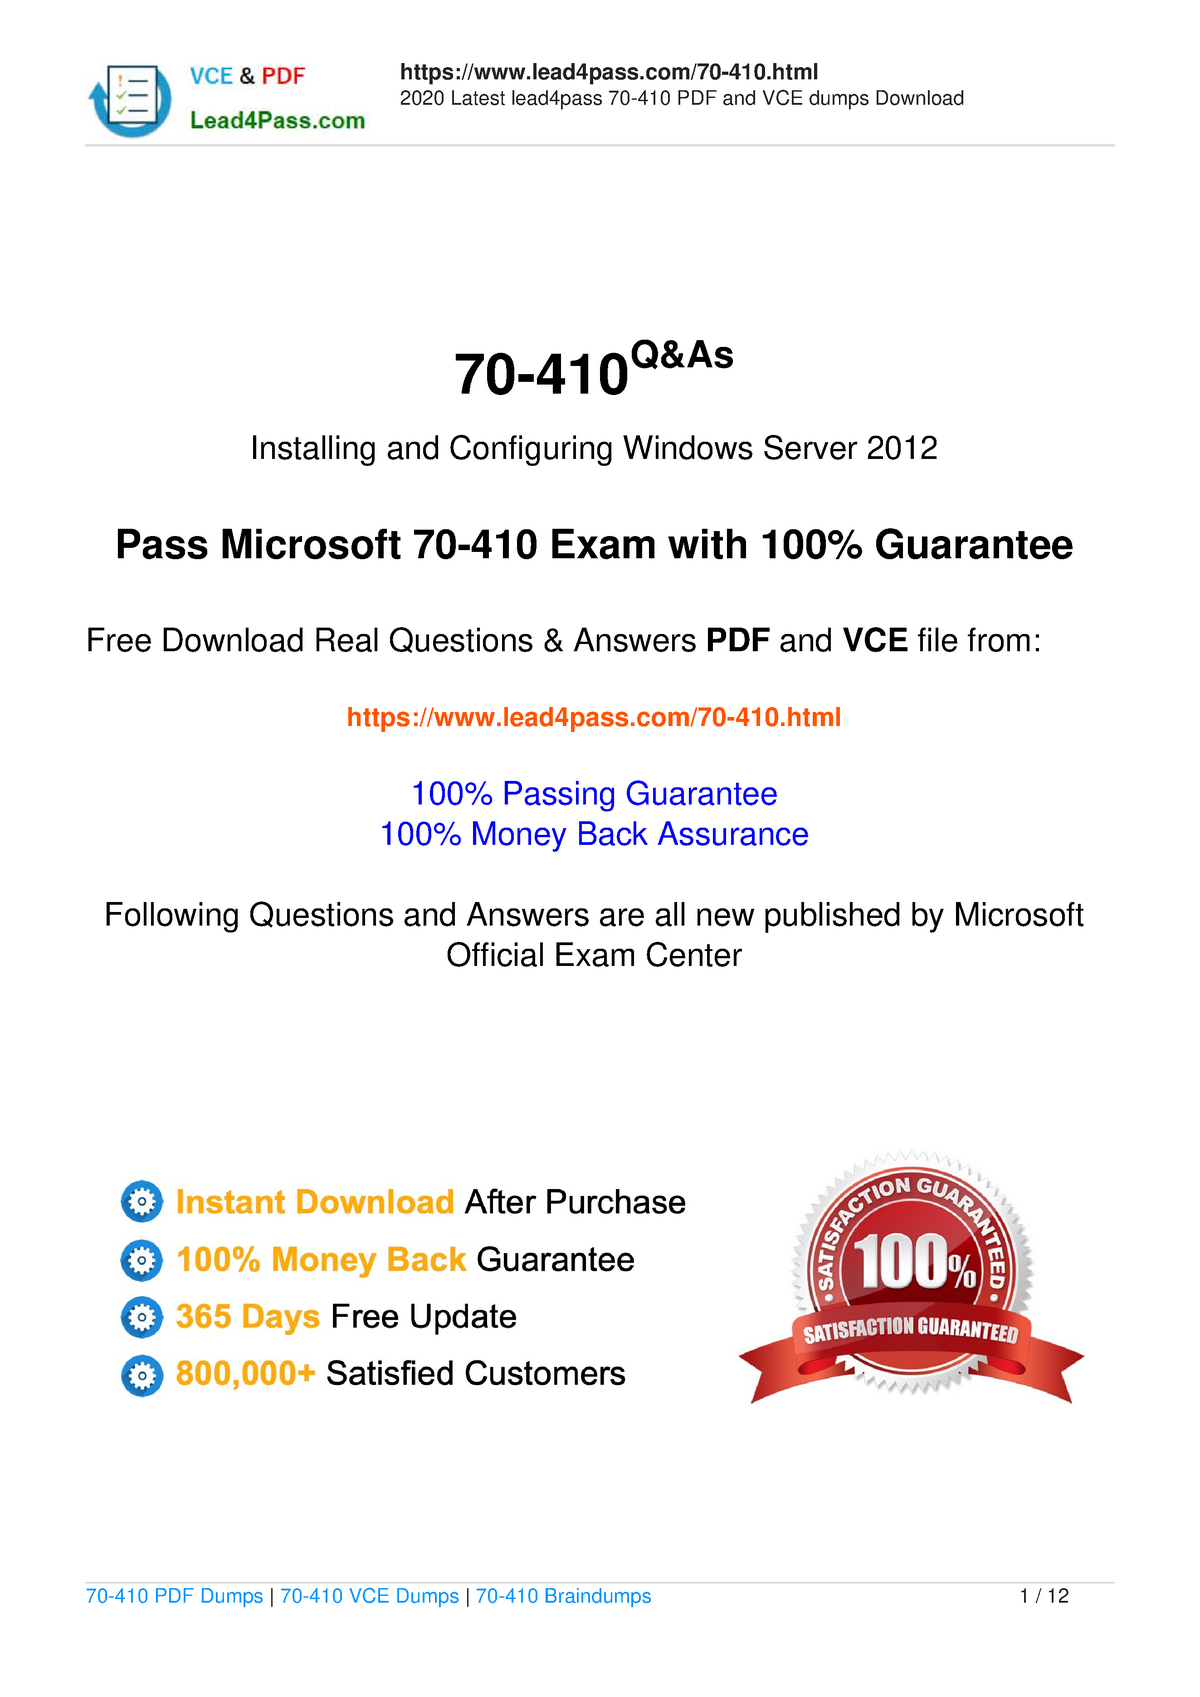 2 Microsoft Mcsa 70 410 Exam Questions And Answers Latest Lead4pass 70 410 Pdf And Studocu